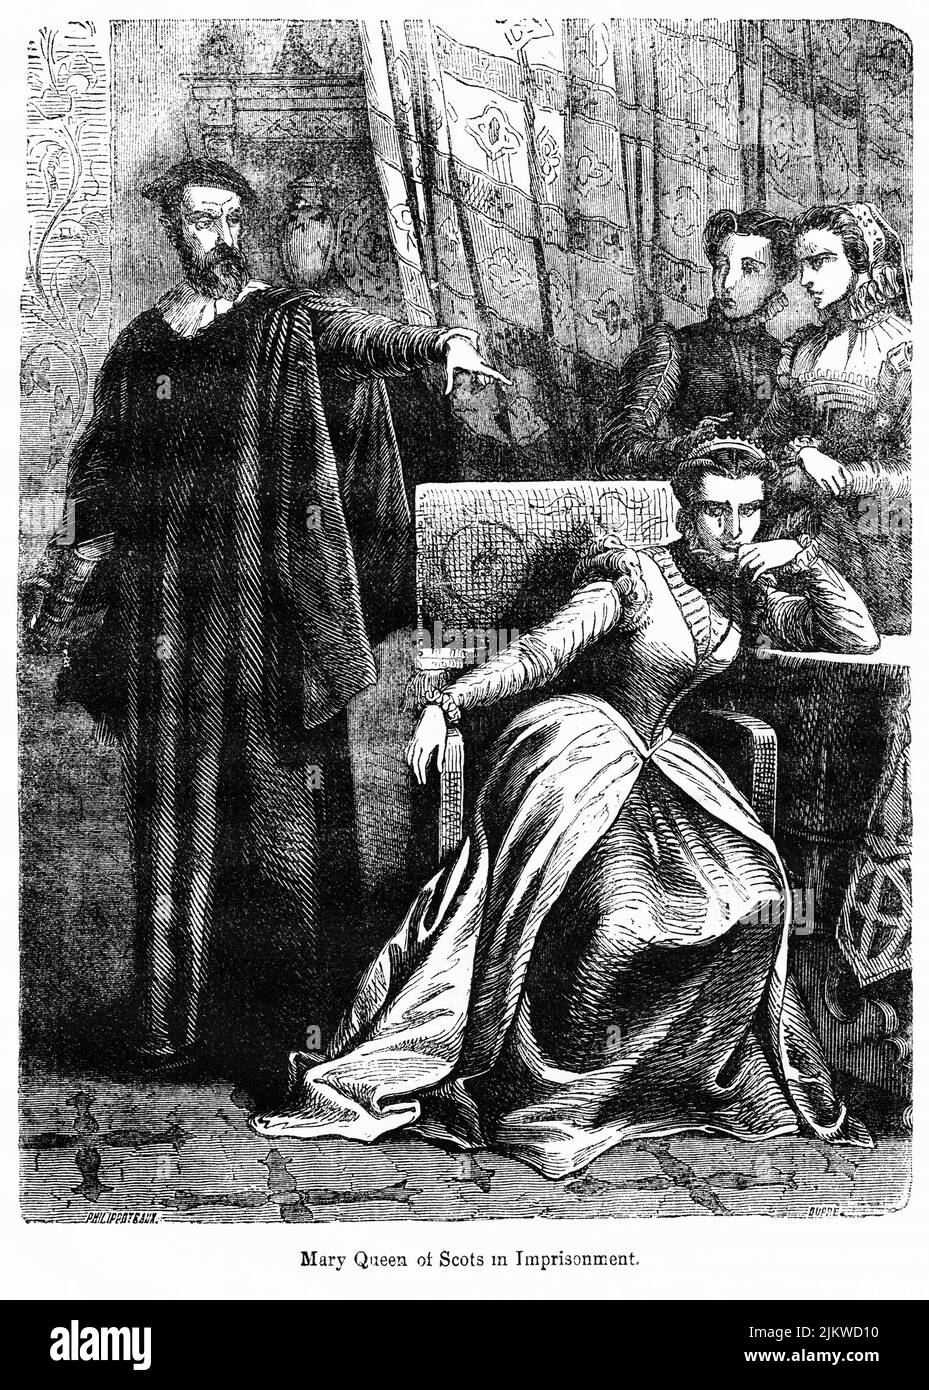 Mary Queen of Scots in Imprisonment, Illustration from the Book, 'John Cassel’s Illustrated History of England, Volume II', text by William Howitt, Cassell, Petter, and Galpin, London, 1858 Stock Photo